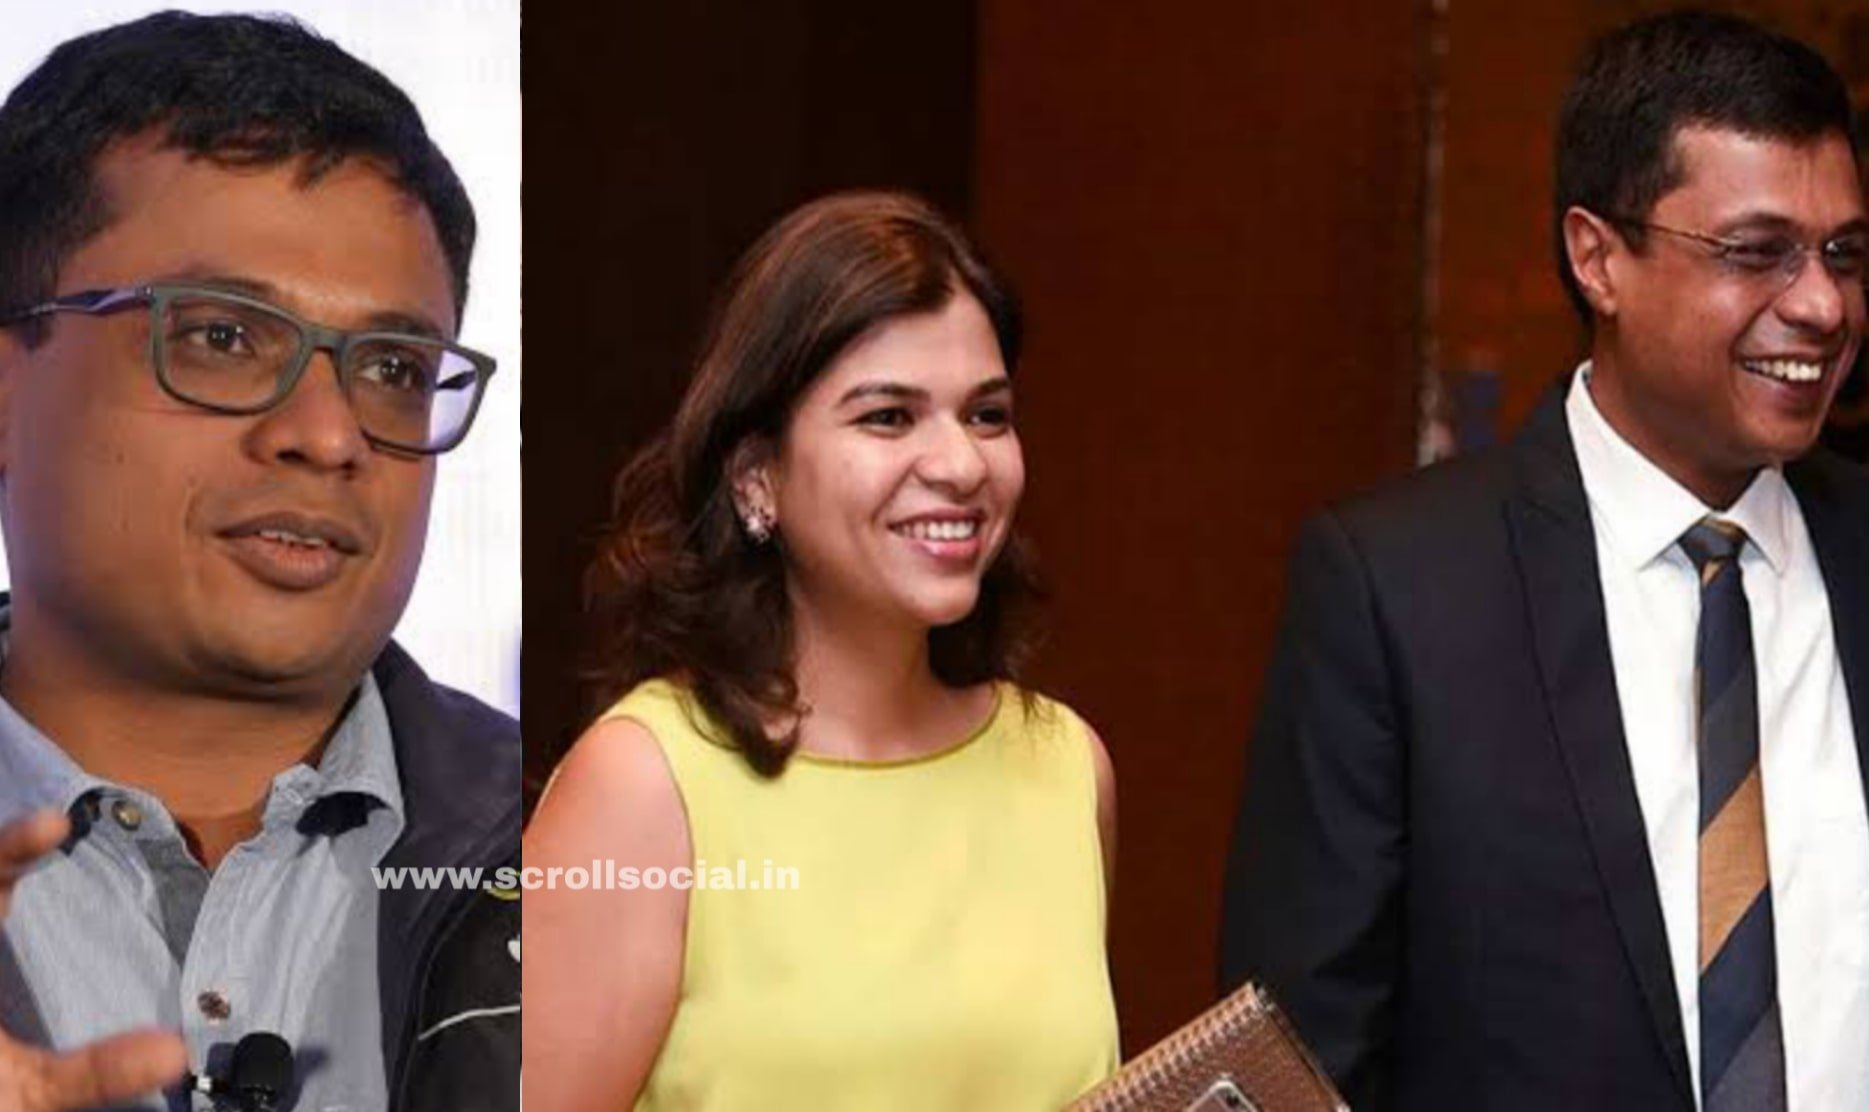 Co-Founder of Flipkart Sachin Bansal Wife filed a dowry harassment case against him